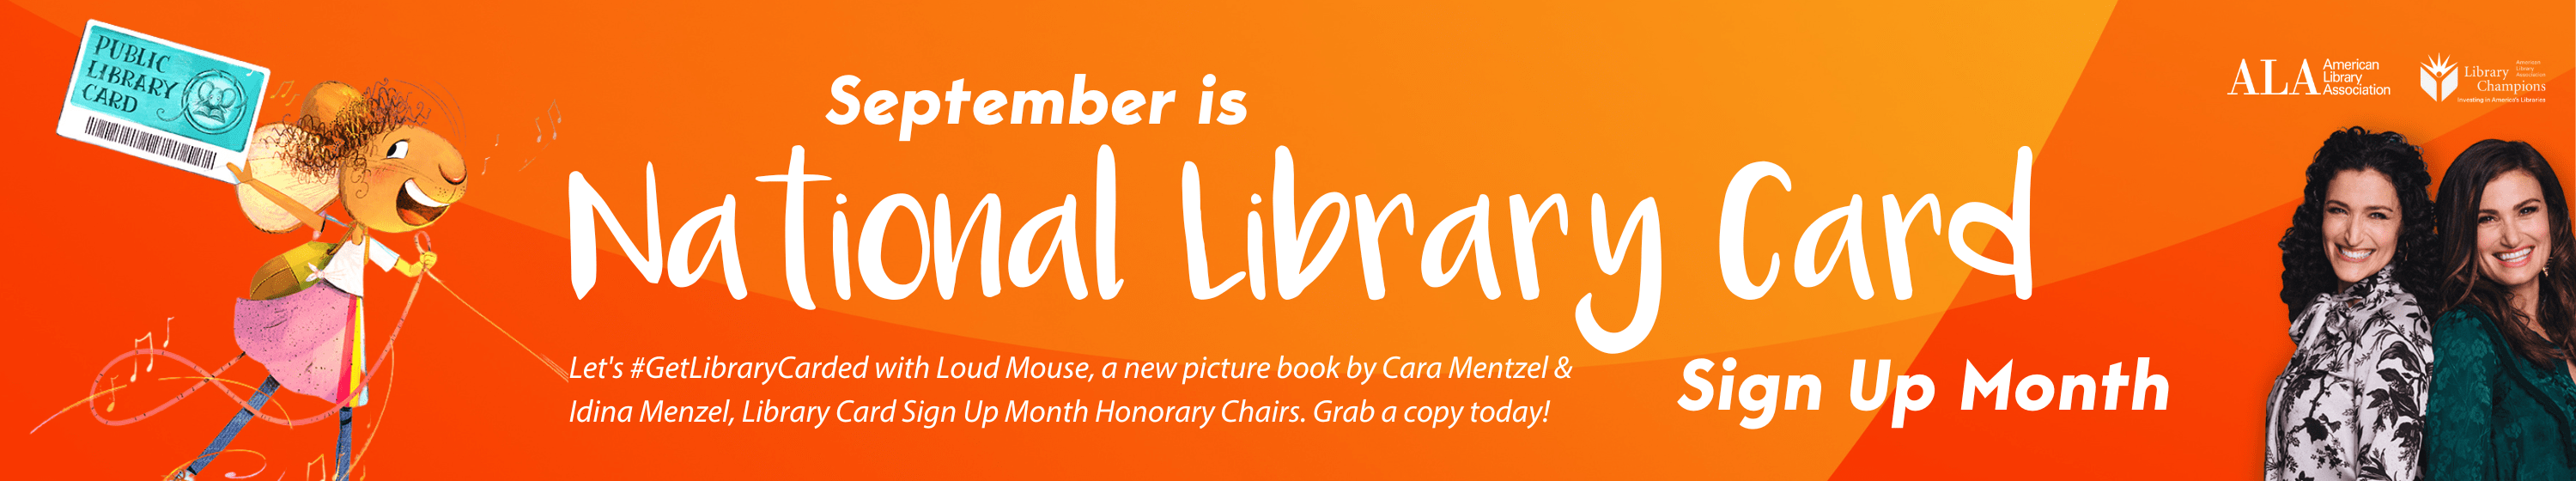 September is National Library Card Sign Up Month.Let's #GetLibraryCarded with Loud Mouse, a new picture book by Cara Mentzel & Idina Mentzel, Library Card Sign Up Month Honorary Chairs. Grab a copy today!